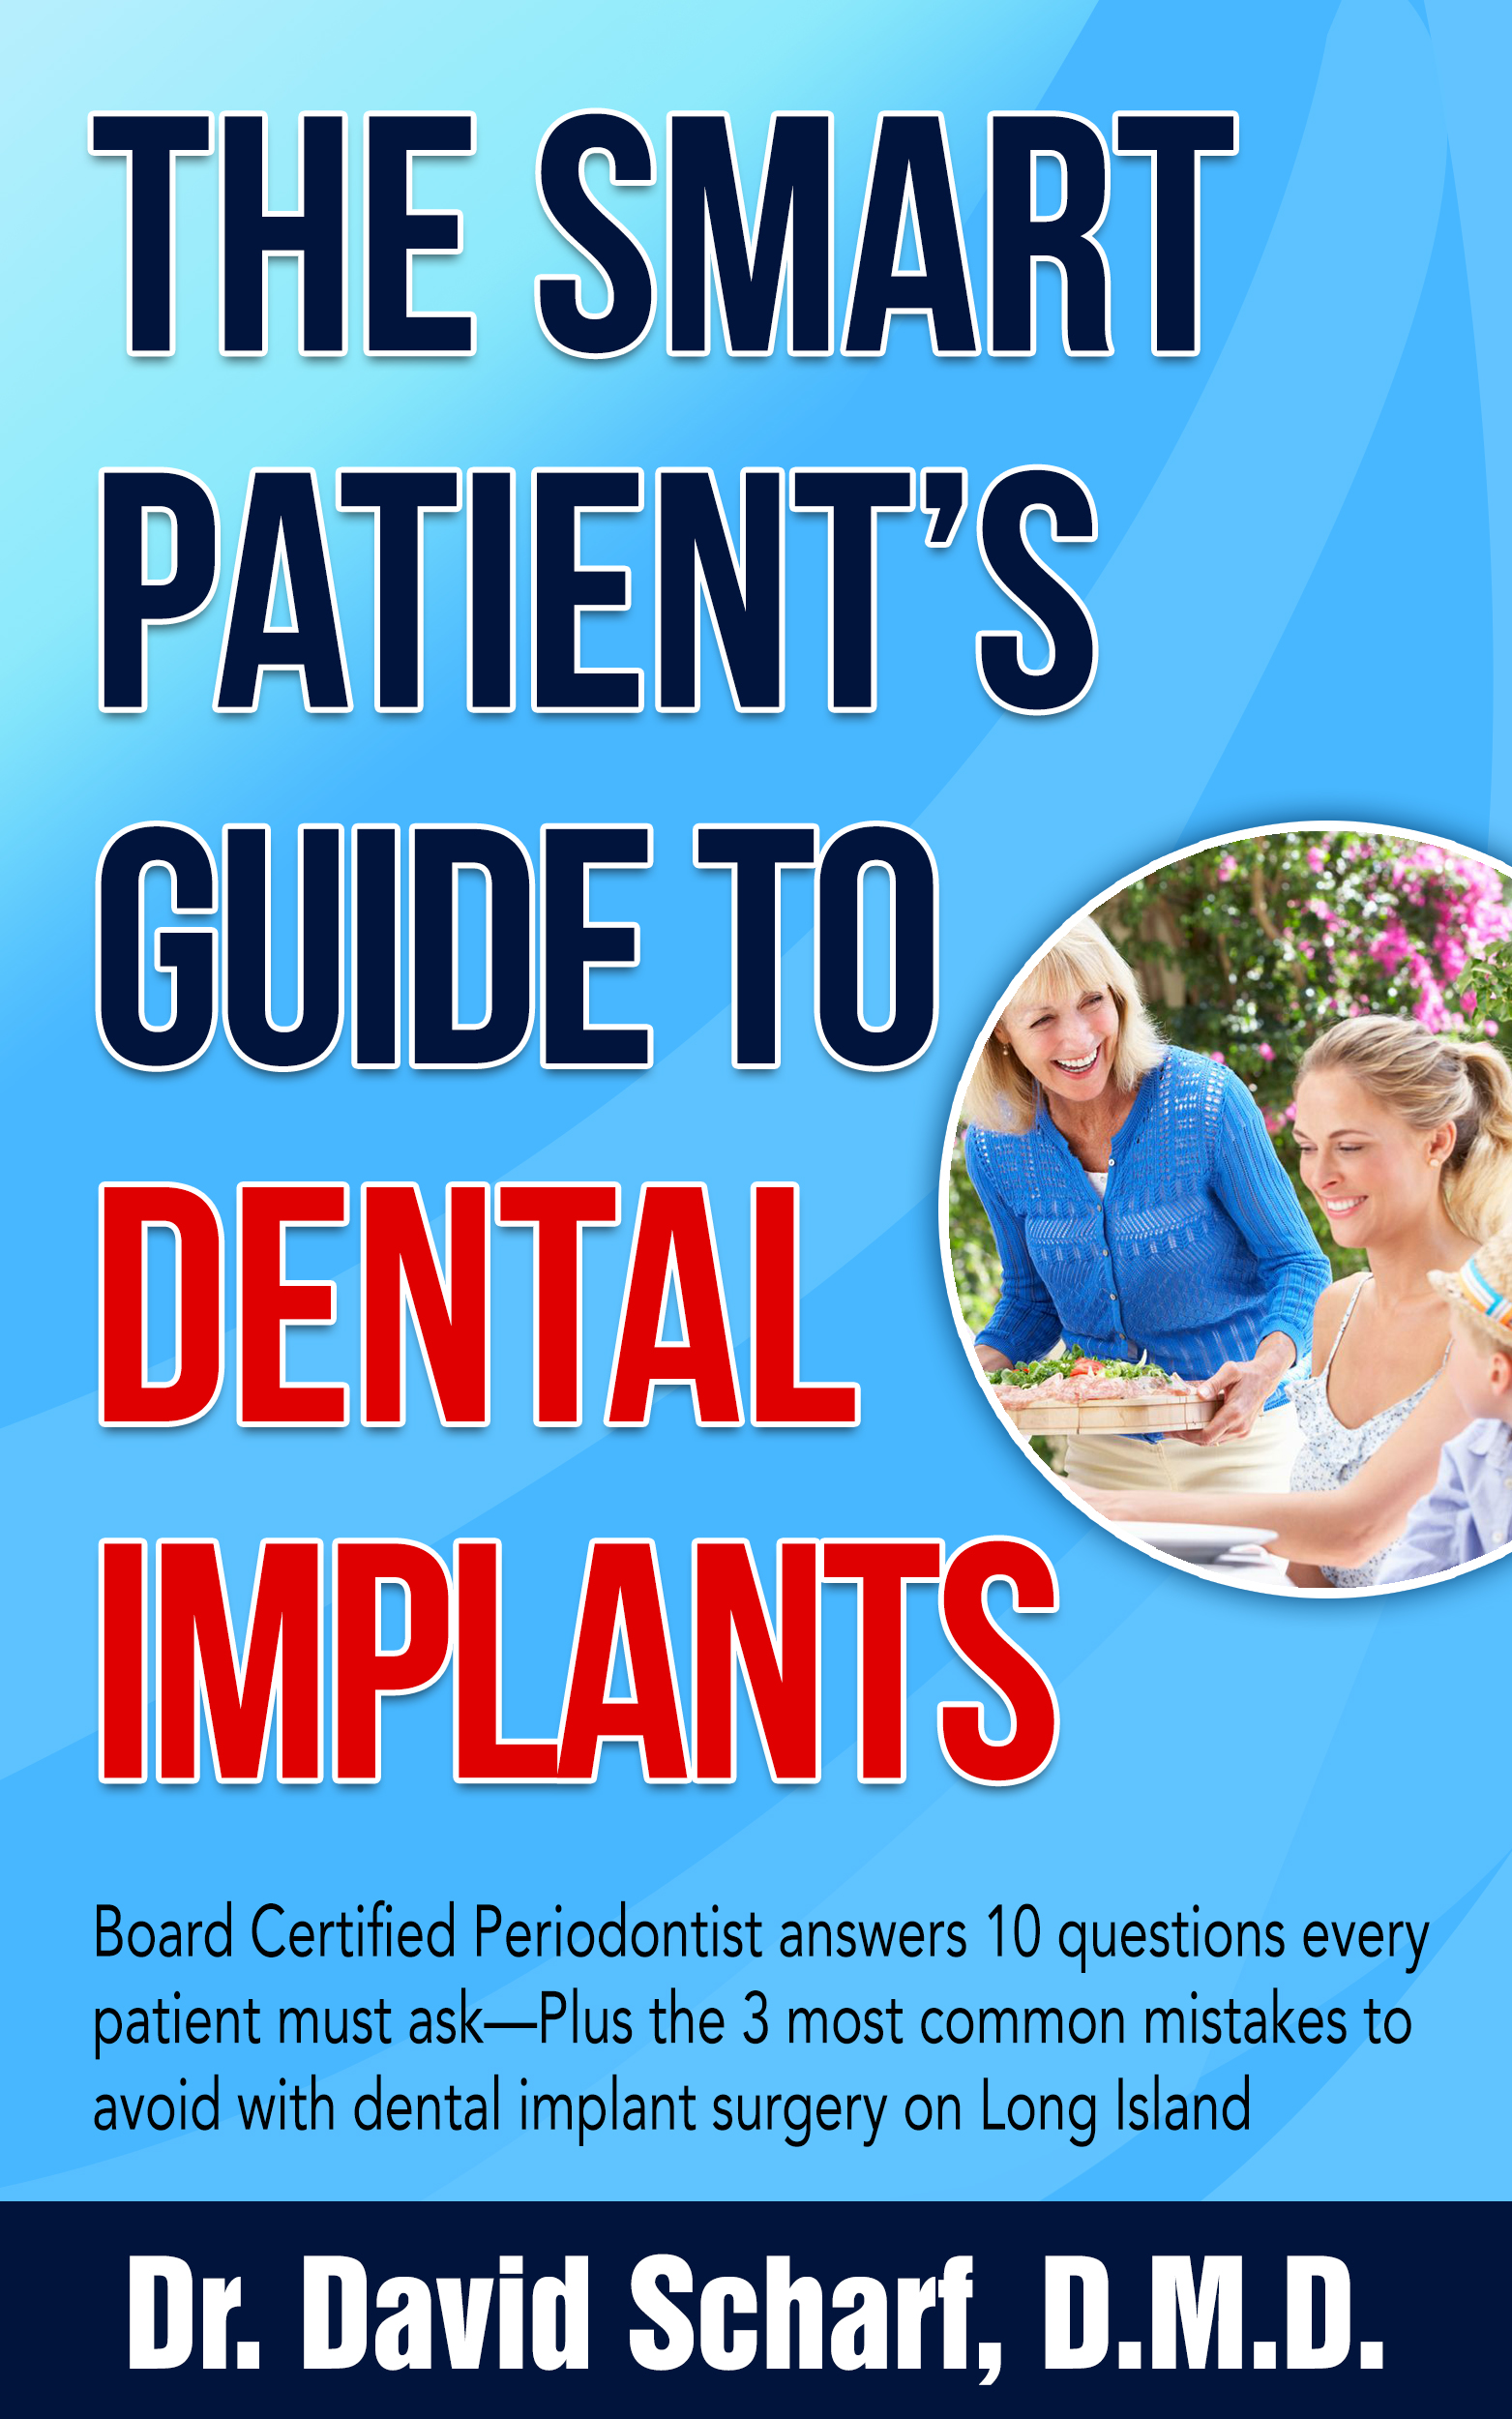 The Smart Patient's Guide to Dental Implants